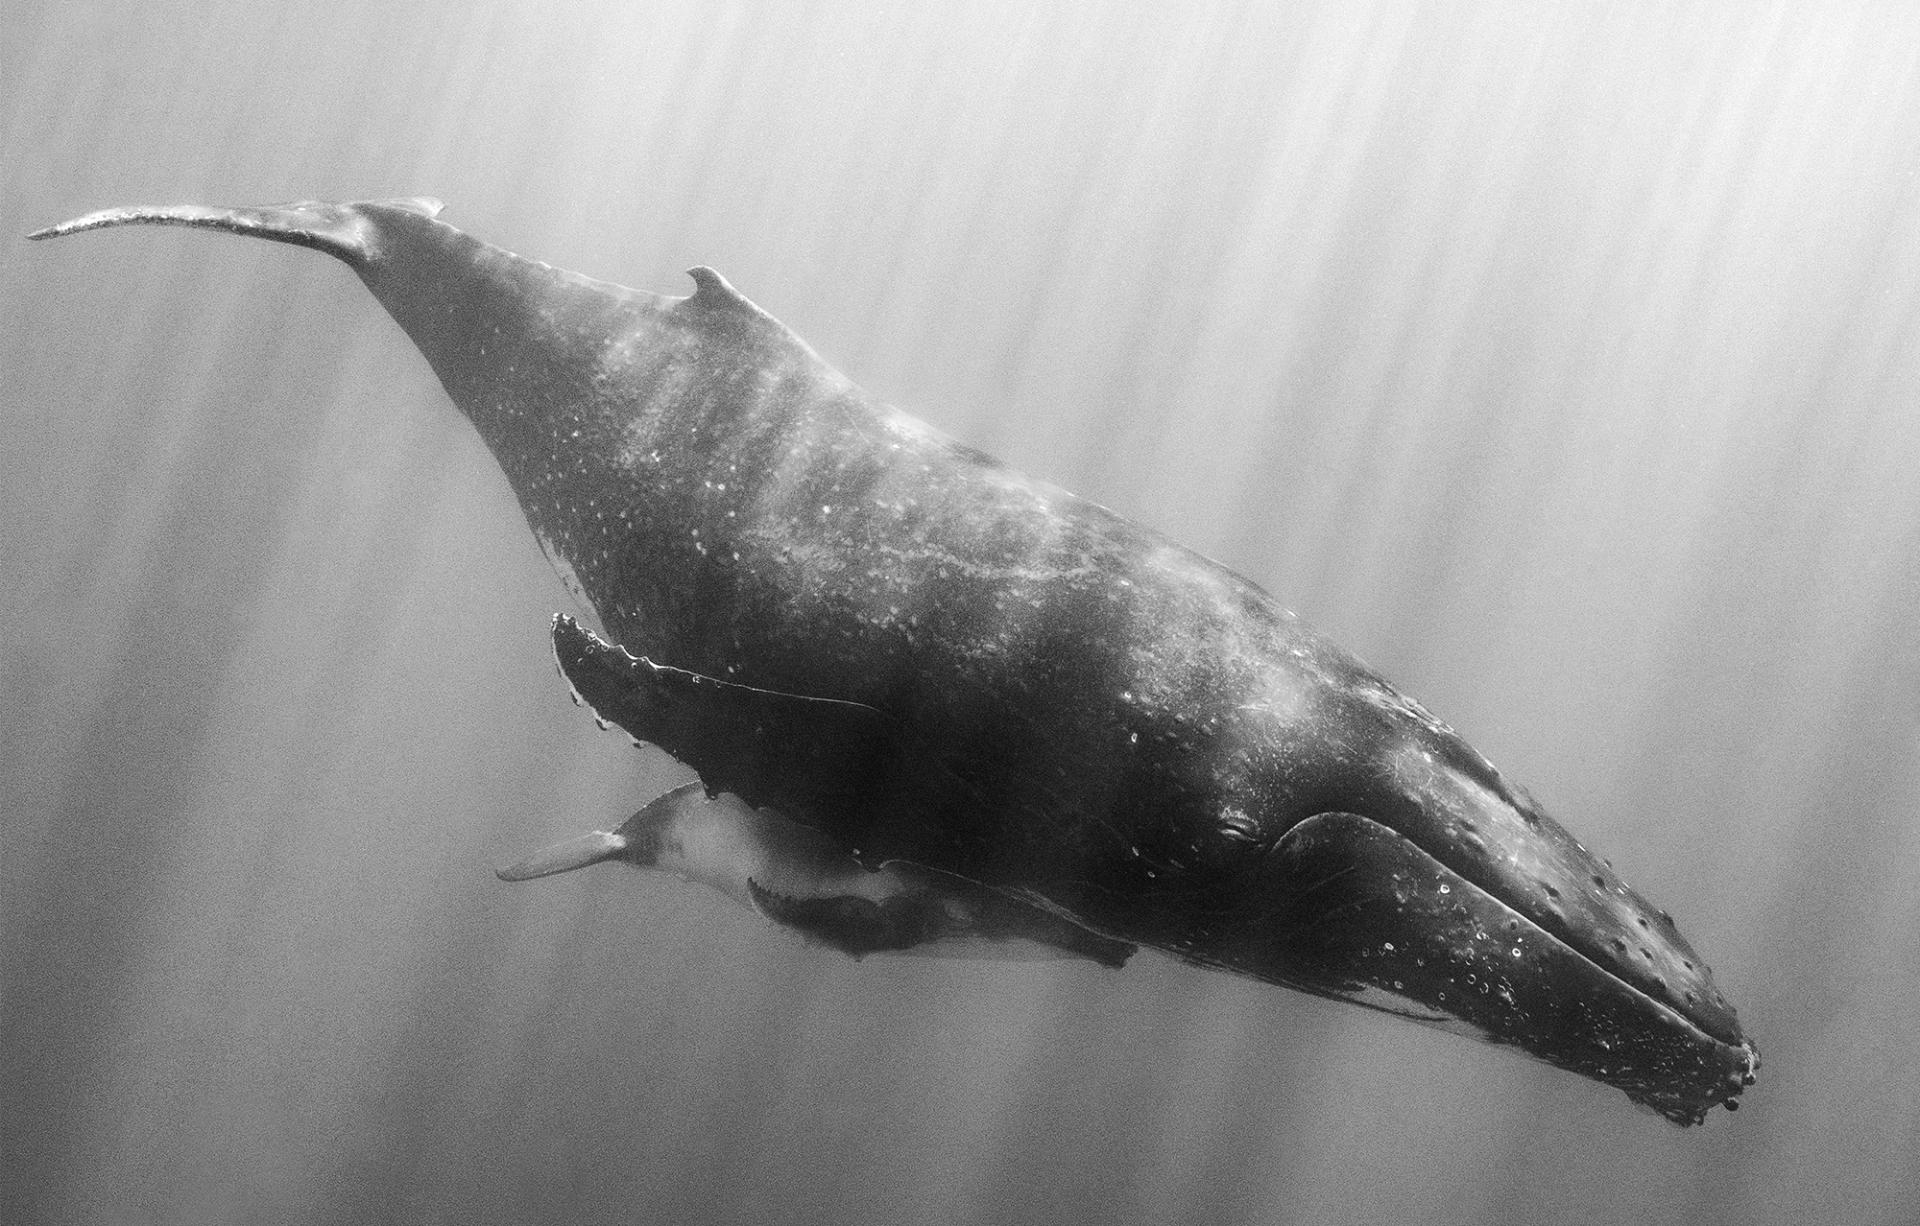 New York Photography Awards Winner - Whale Together